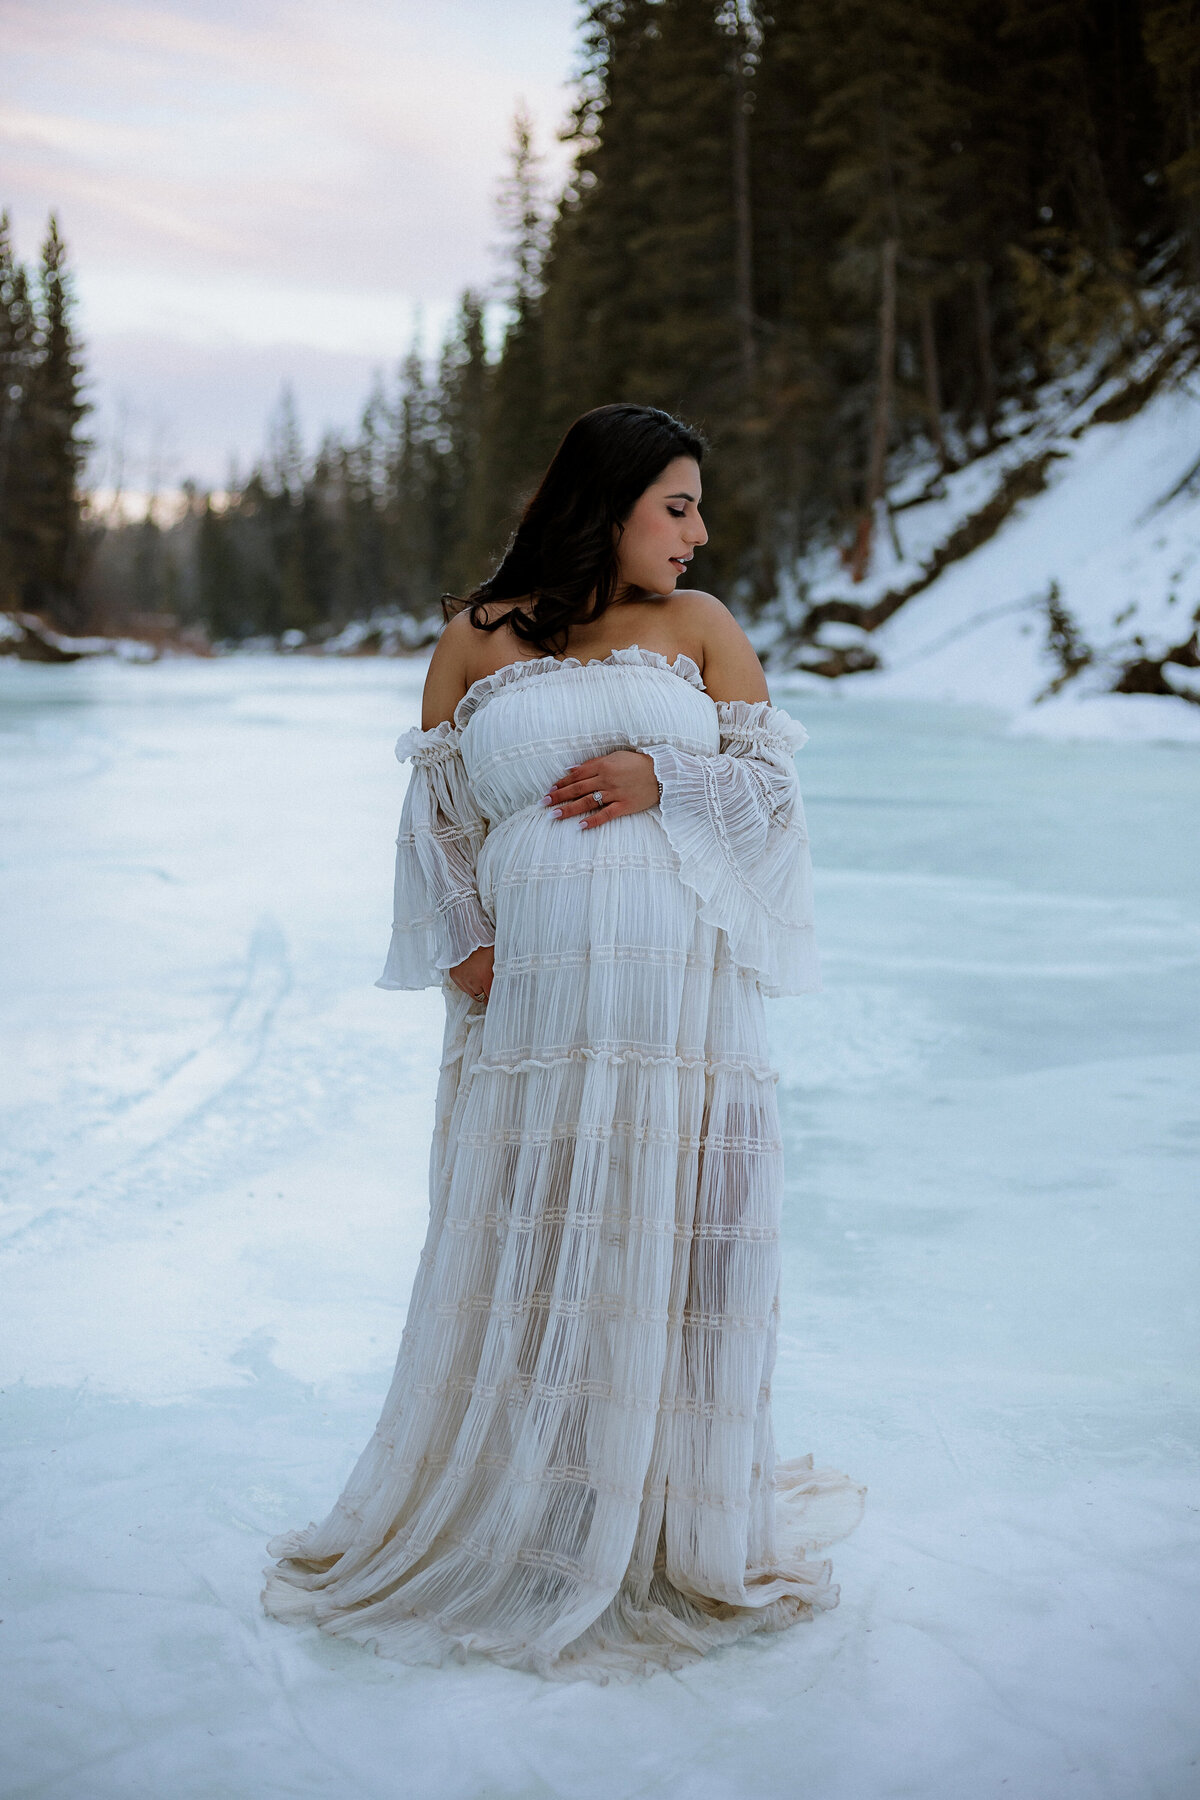 I specialize in capturing the beauty of maternity through photography in Calgary. Let me preserve the radiance and anticipation of this special journey